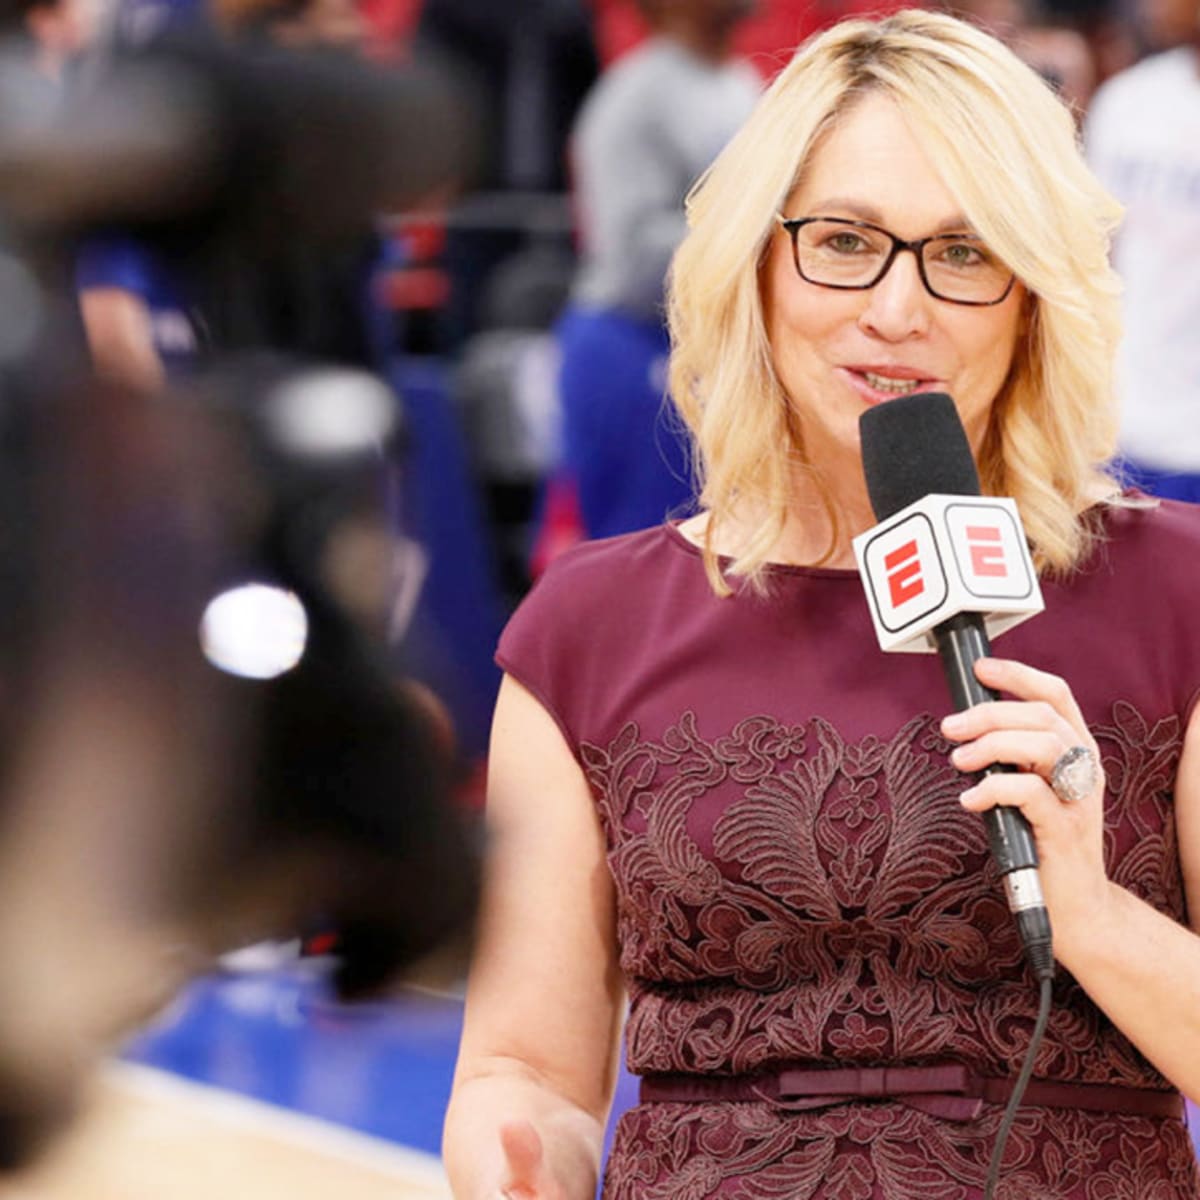 Doris Burke In Photos: Everything To Know About The NBA Announcer